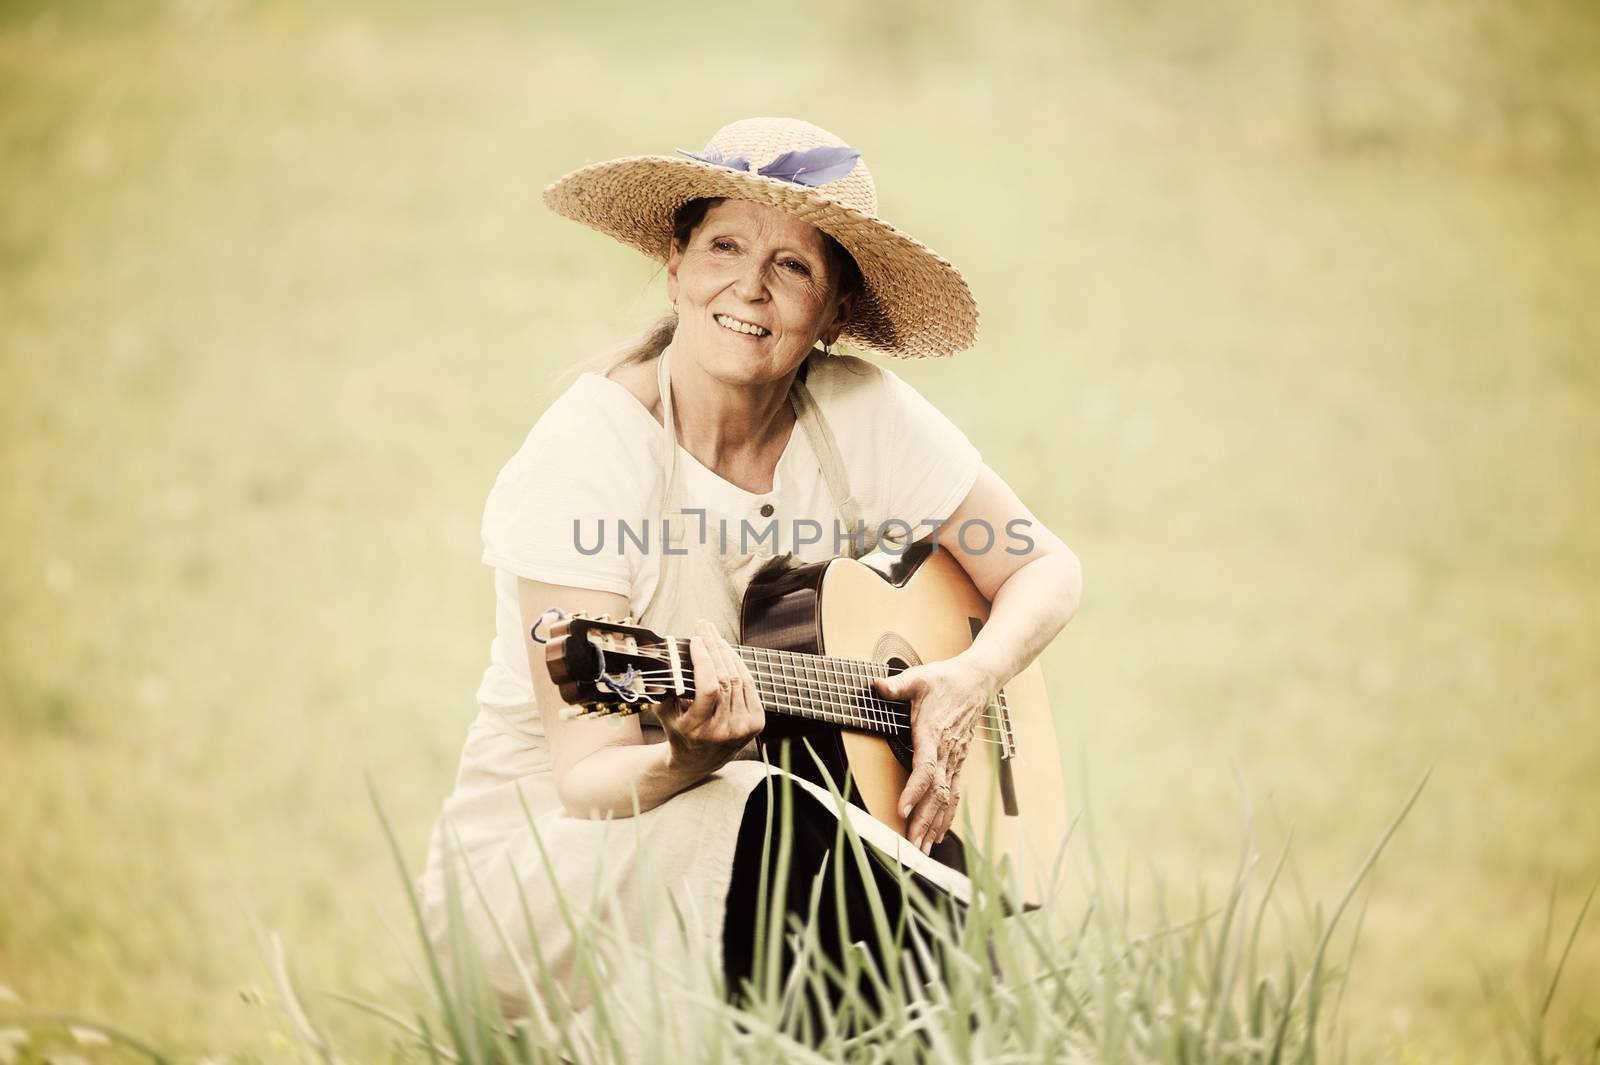 happy senior woman playing guitar outdoors. Digital filters have been used to create a nostalgic retro effect